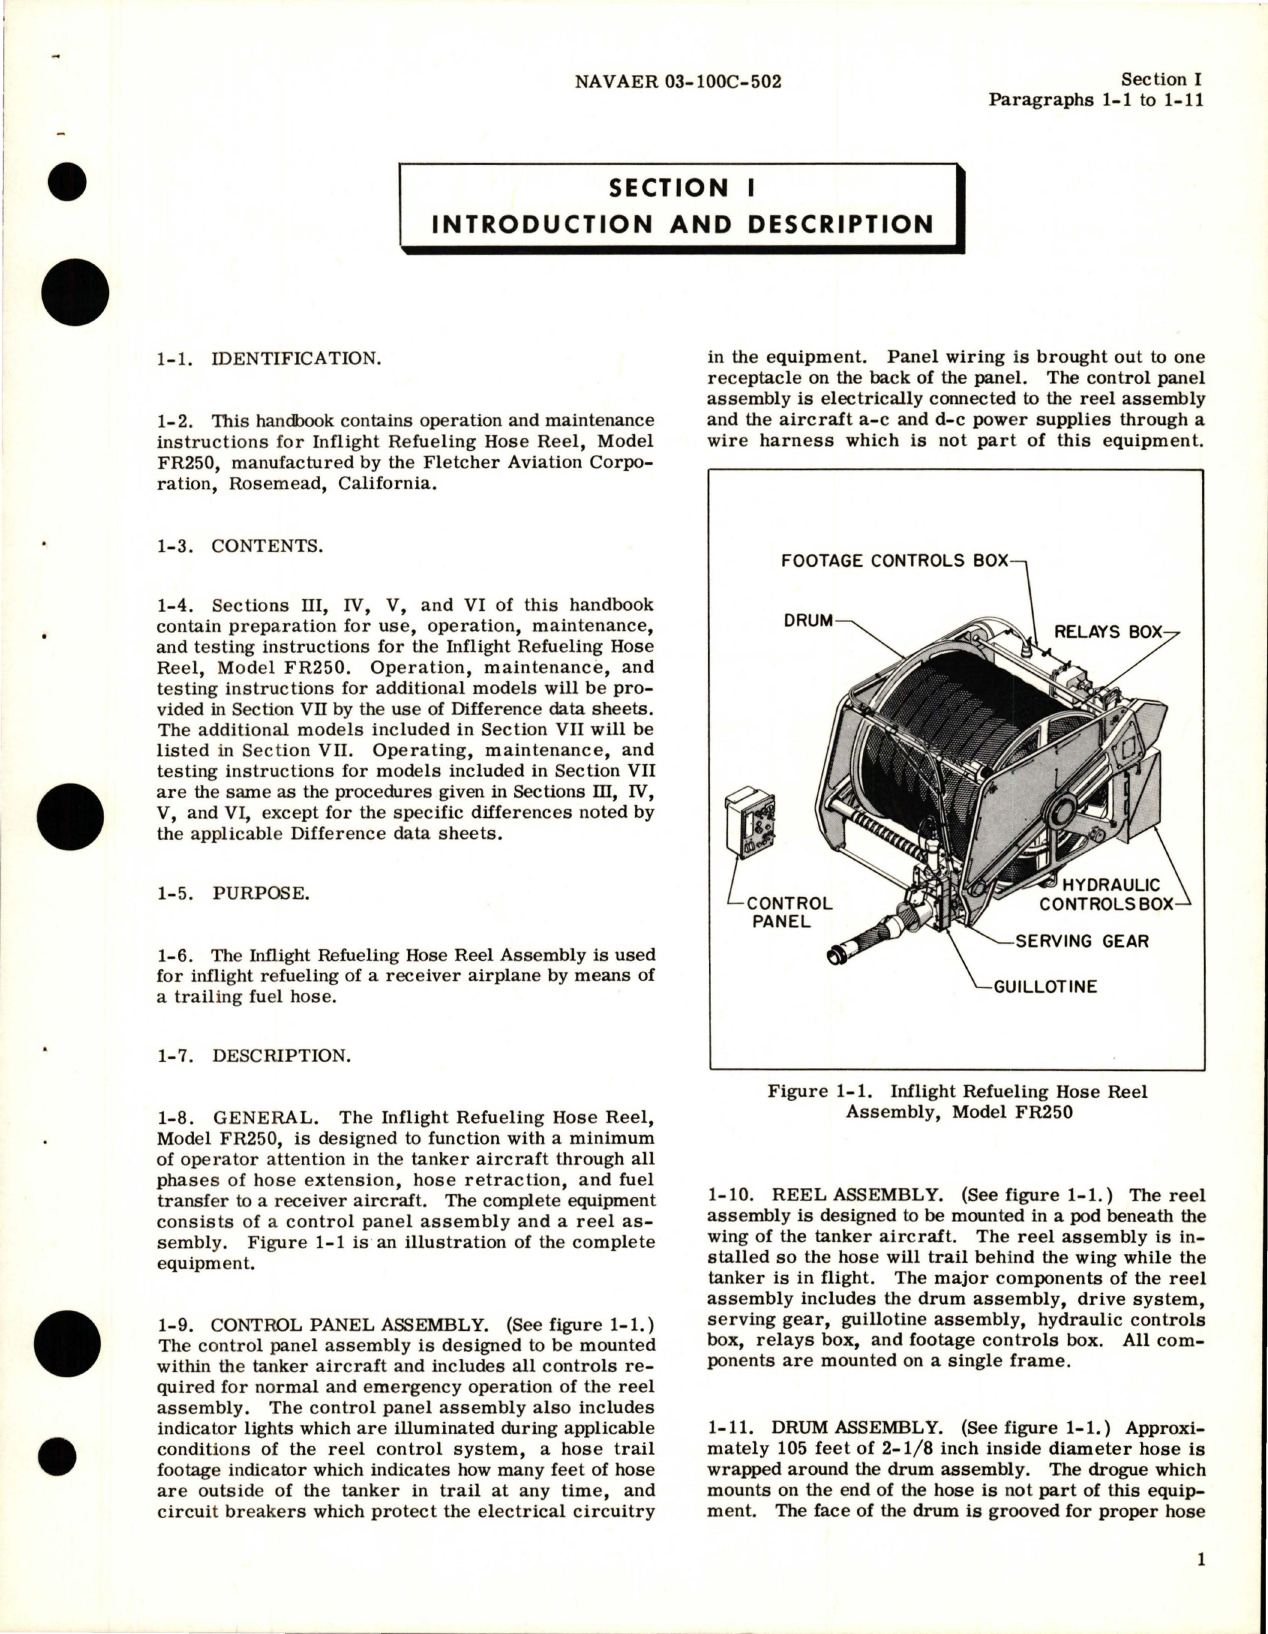 Sample page 5 from AirCorps Library document: Operation and Maintenance Instructions for Inflight Refueling Hose Reel Assembly - Model FR250 